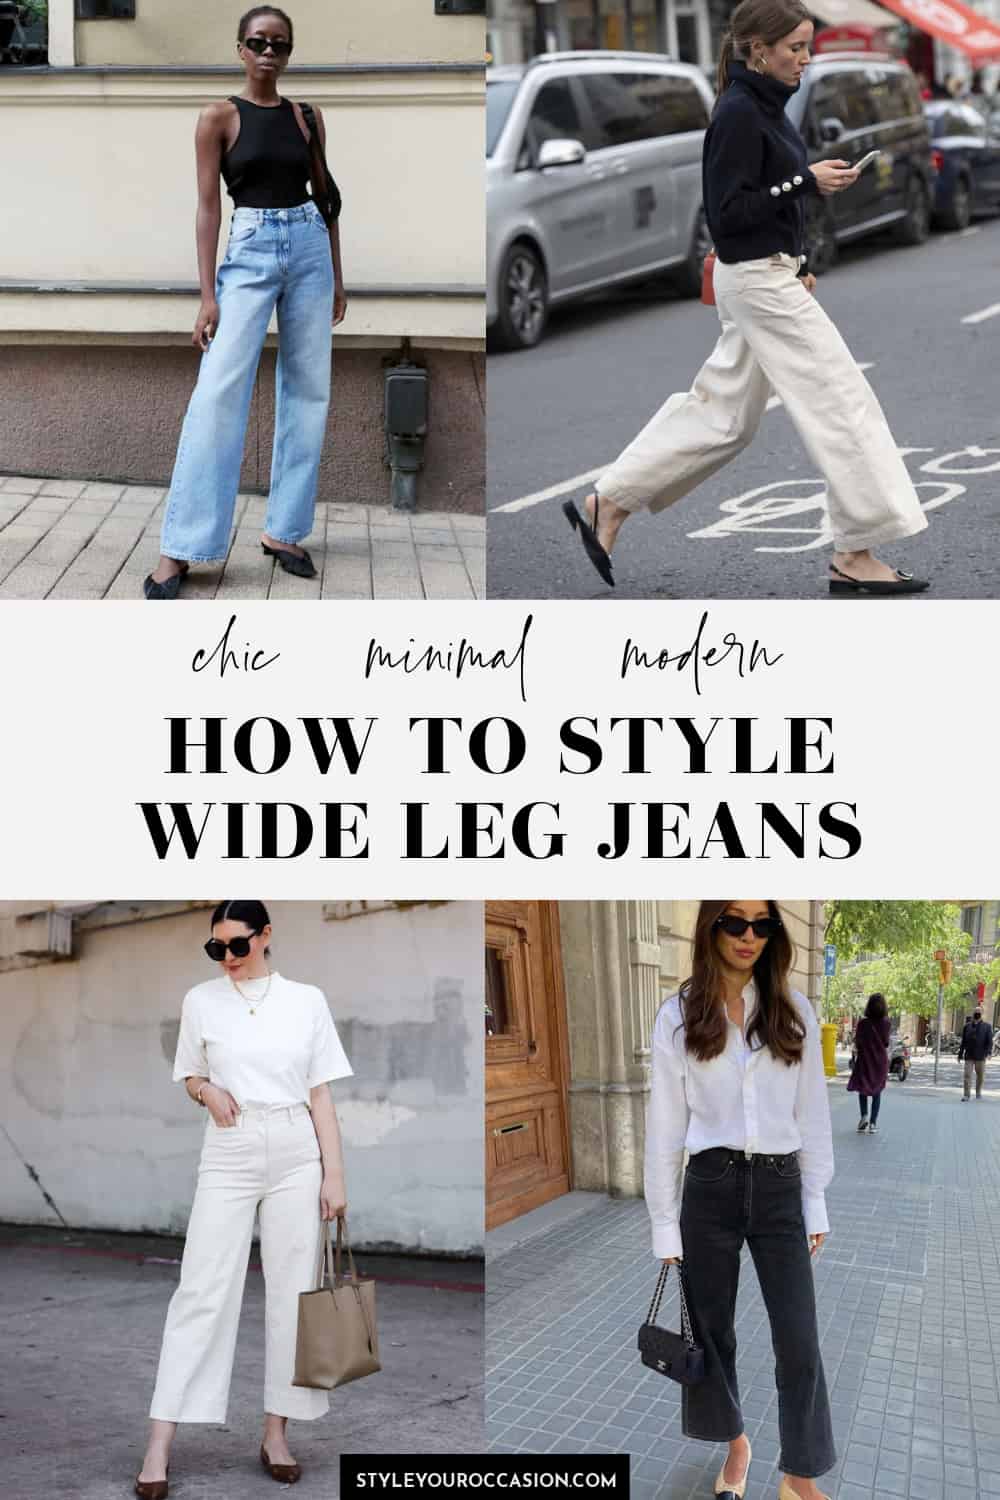 collage of images of women in chic neutral outfits with wide leg jeans